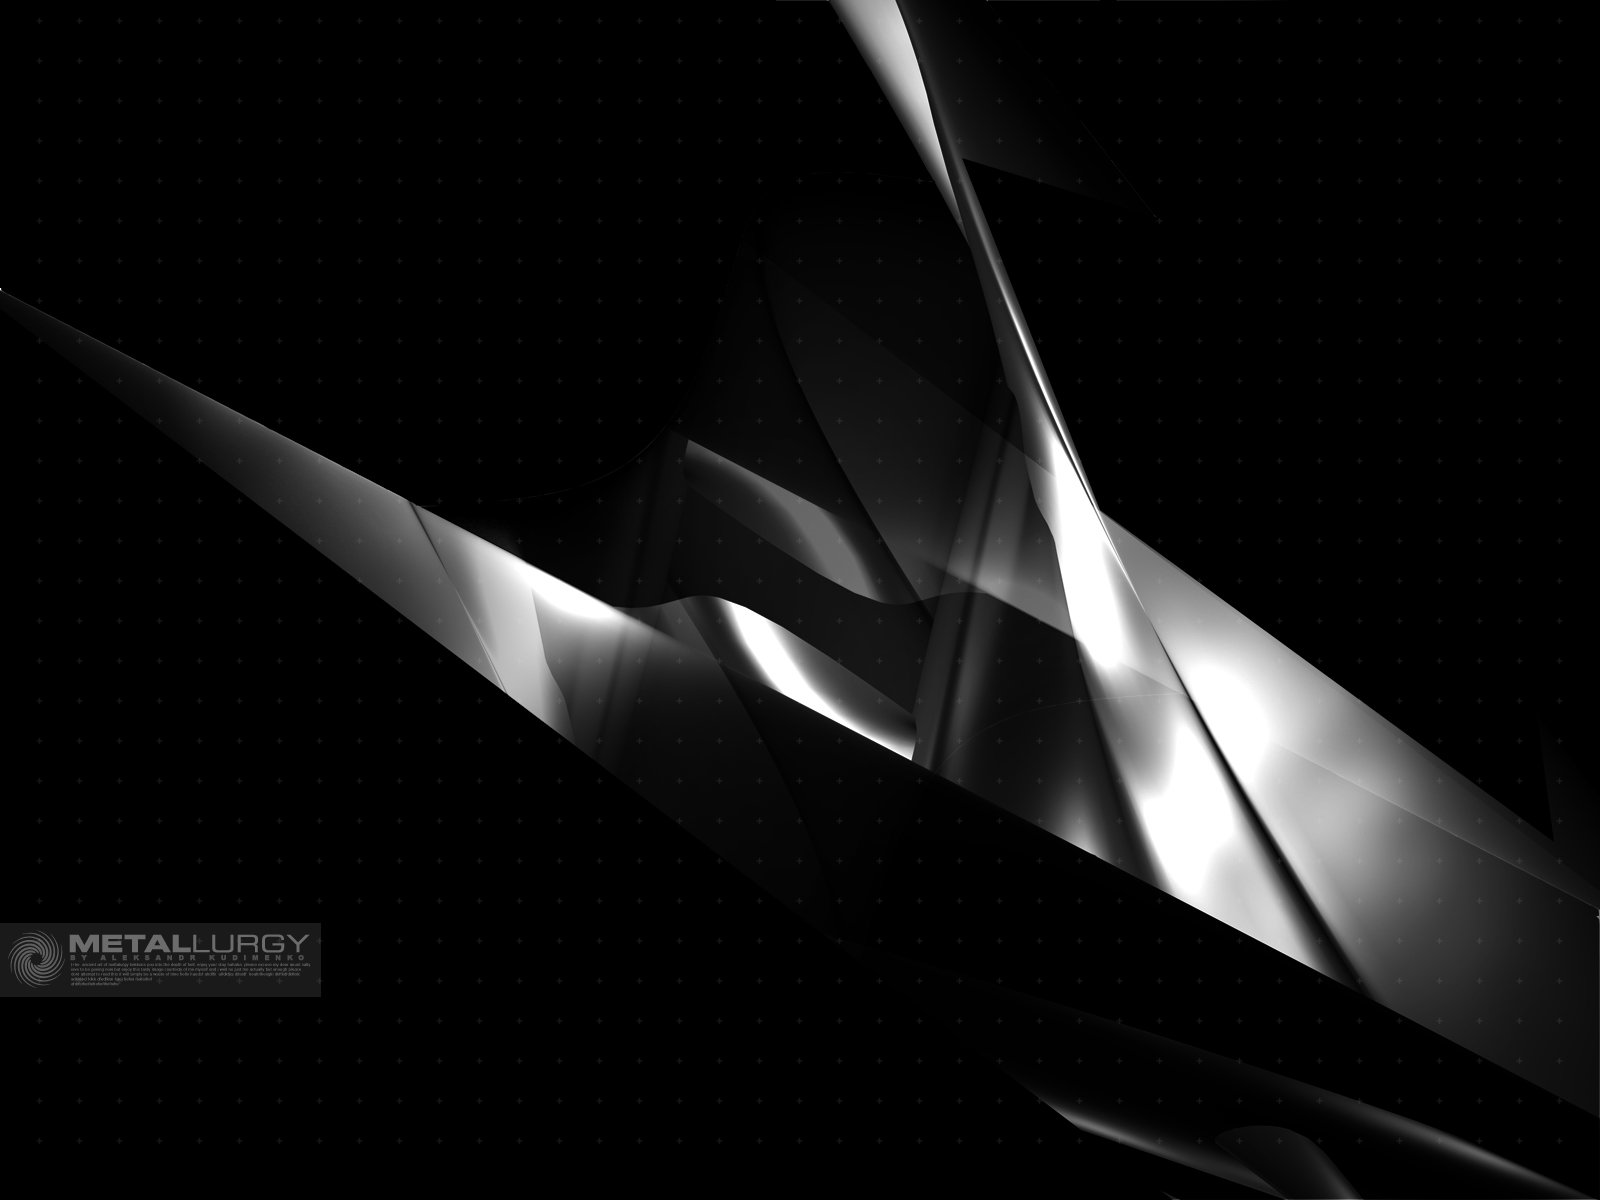 Black and White wallpaper   Abstract wallpapers   Free wallpapers